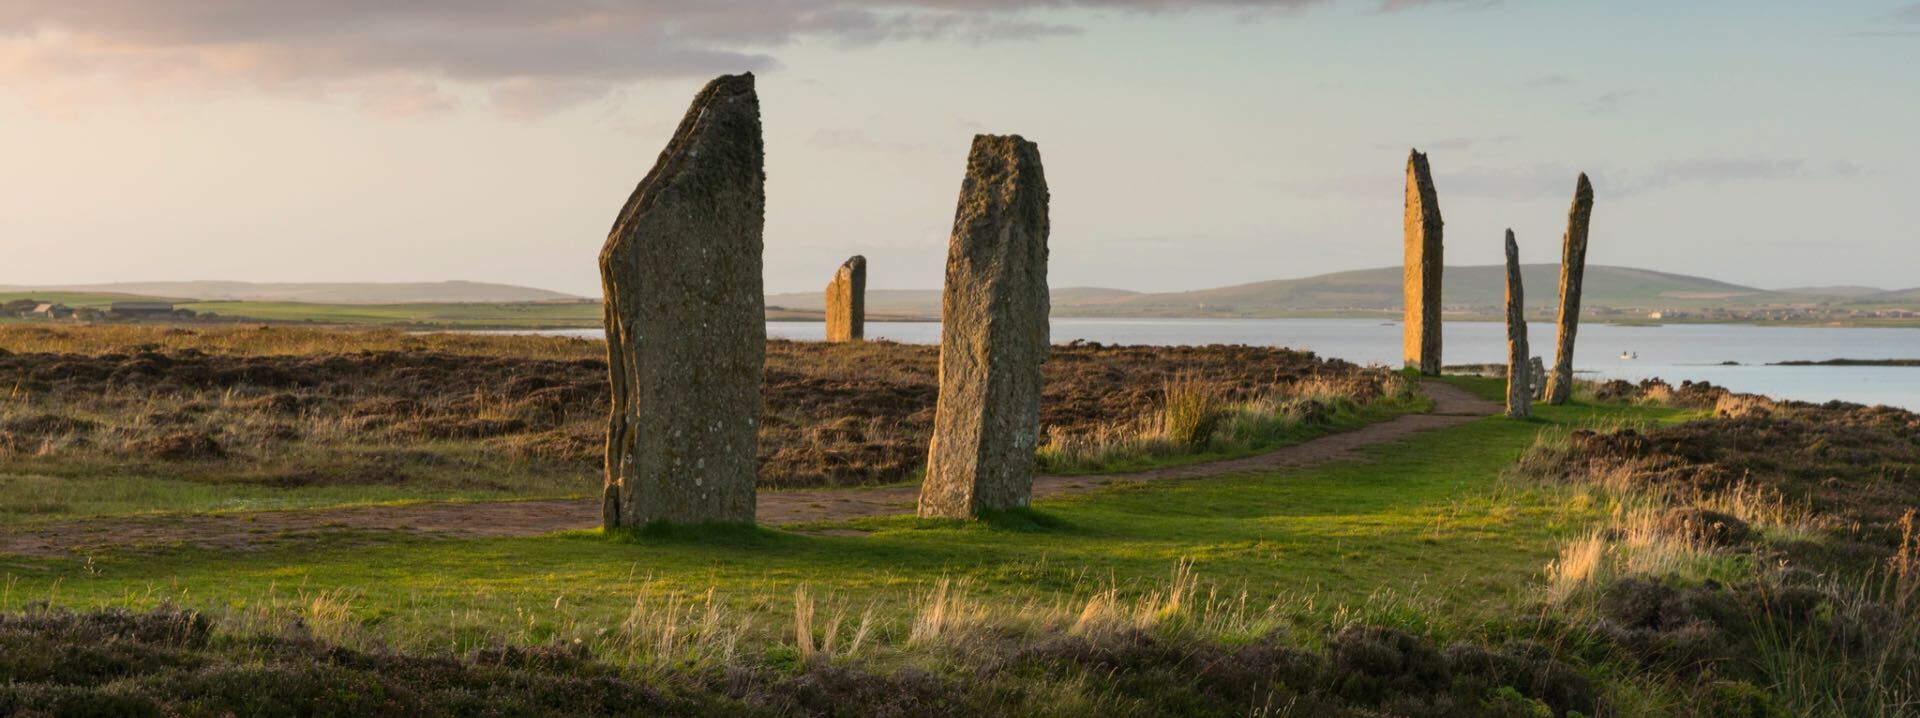 The standing stones of the Ring of Brodgar amongst the grass, the sea in the background